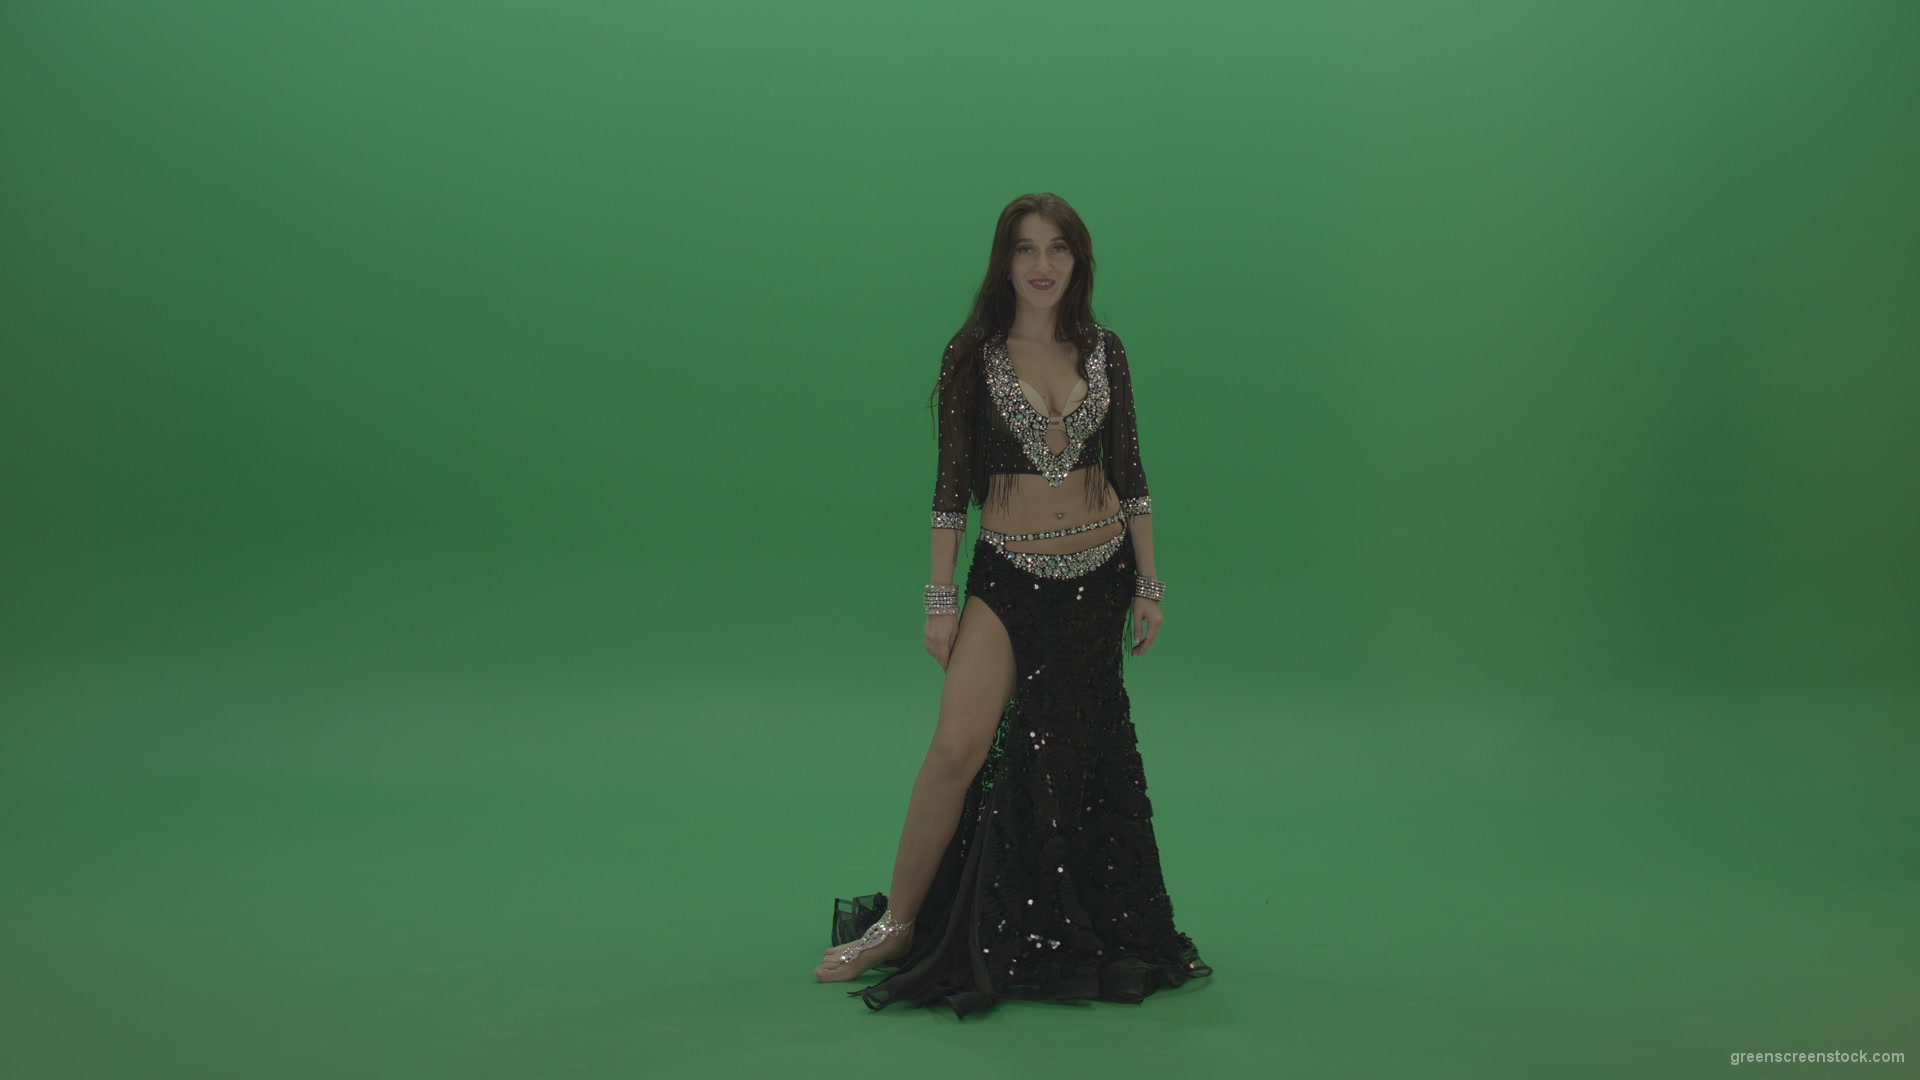 Adorable-belly-dancer-in-black-wear-display-amazing-dance-moves-over-chromakey-background_001 Green Screen Stock